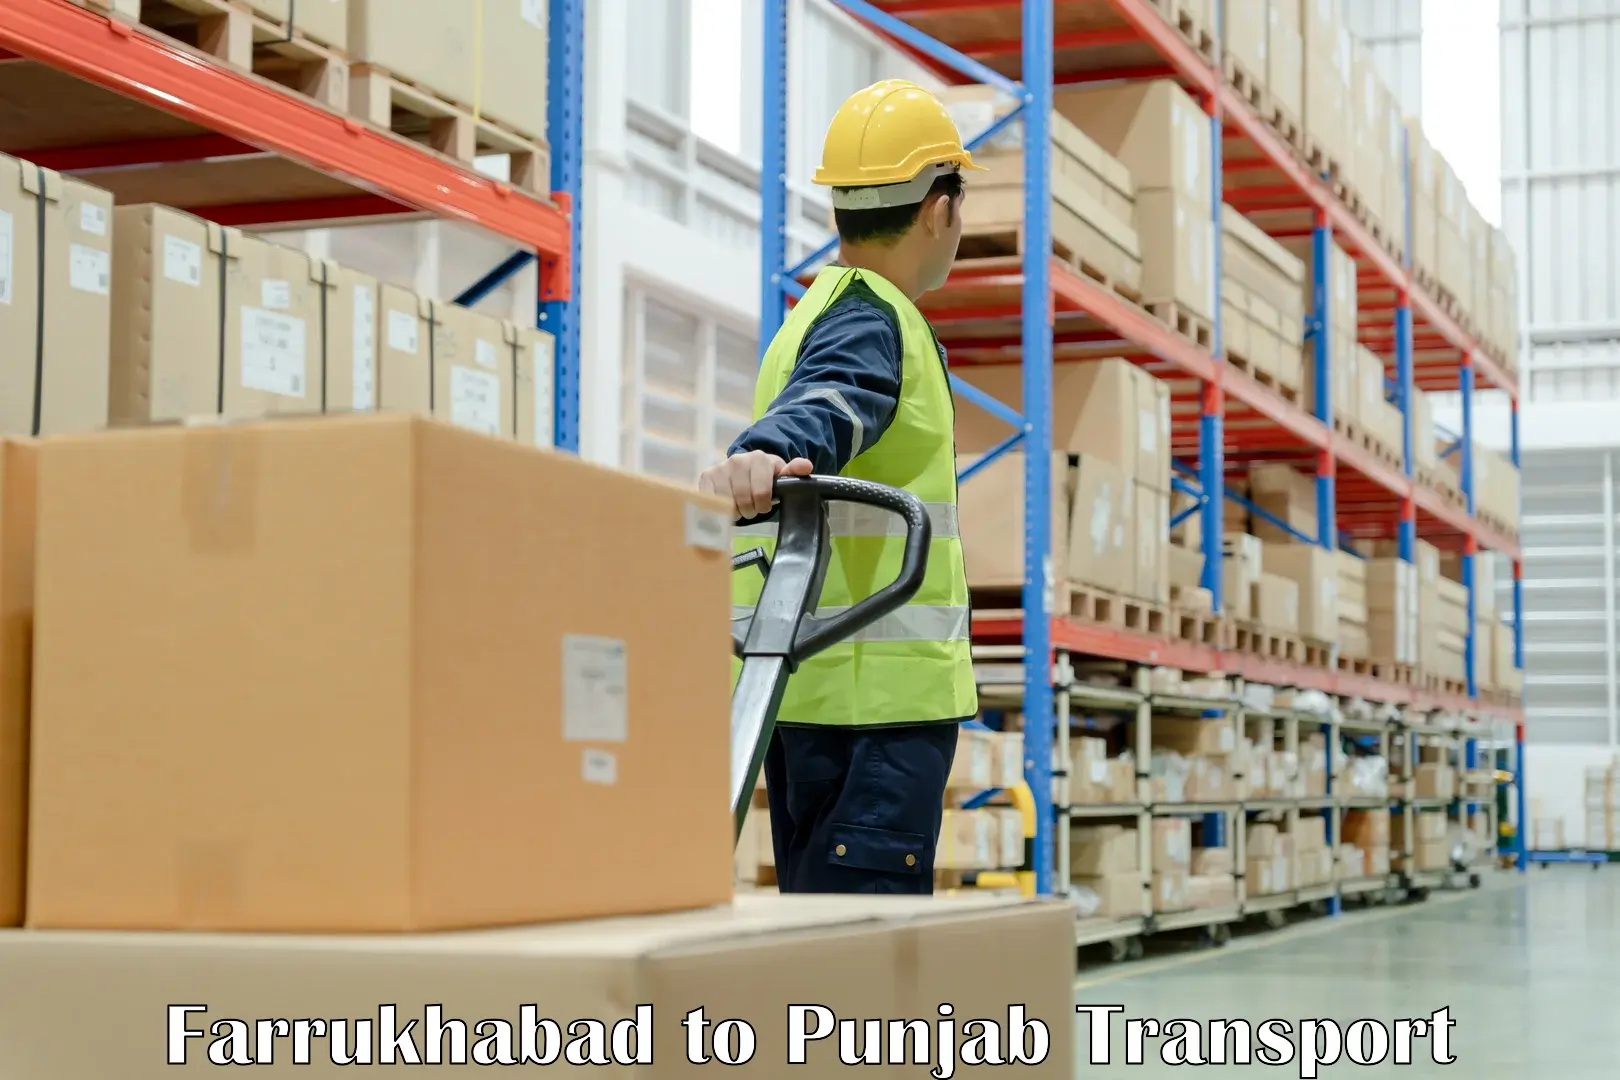 Delivery service Farrukhabad to Patiala